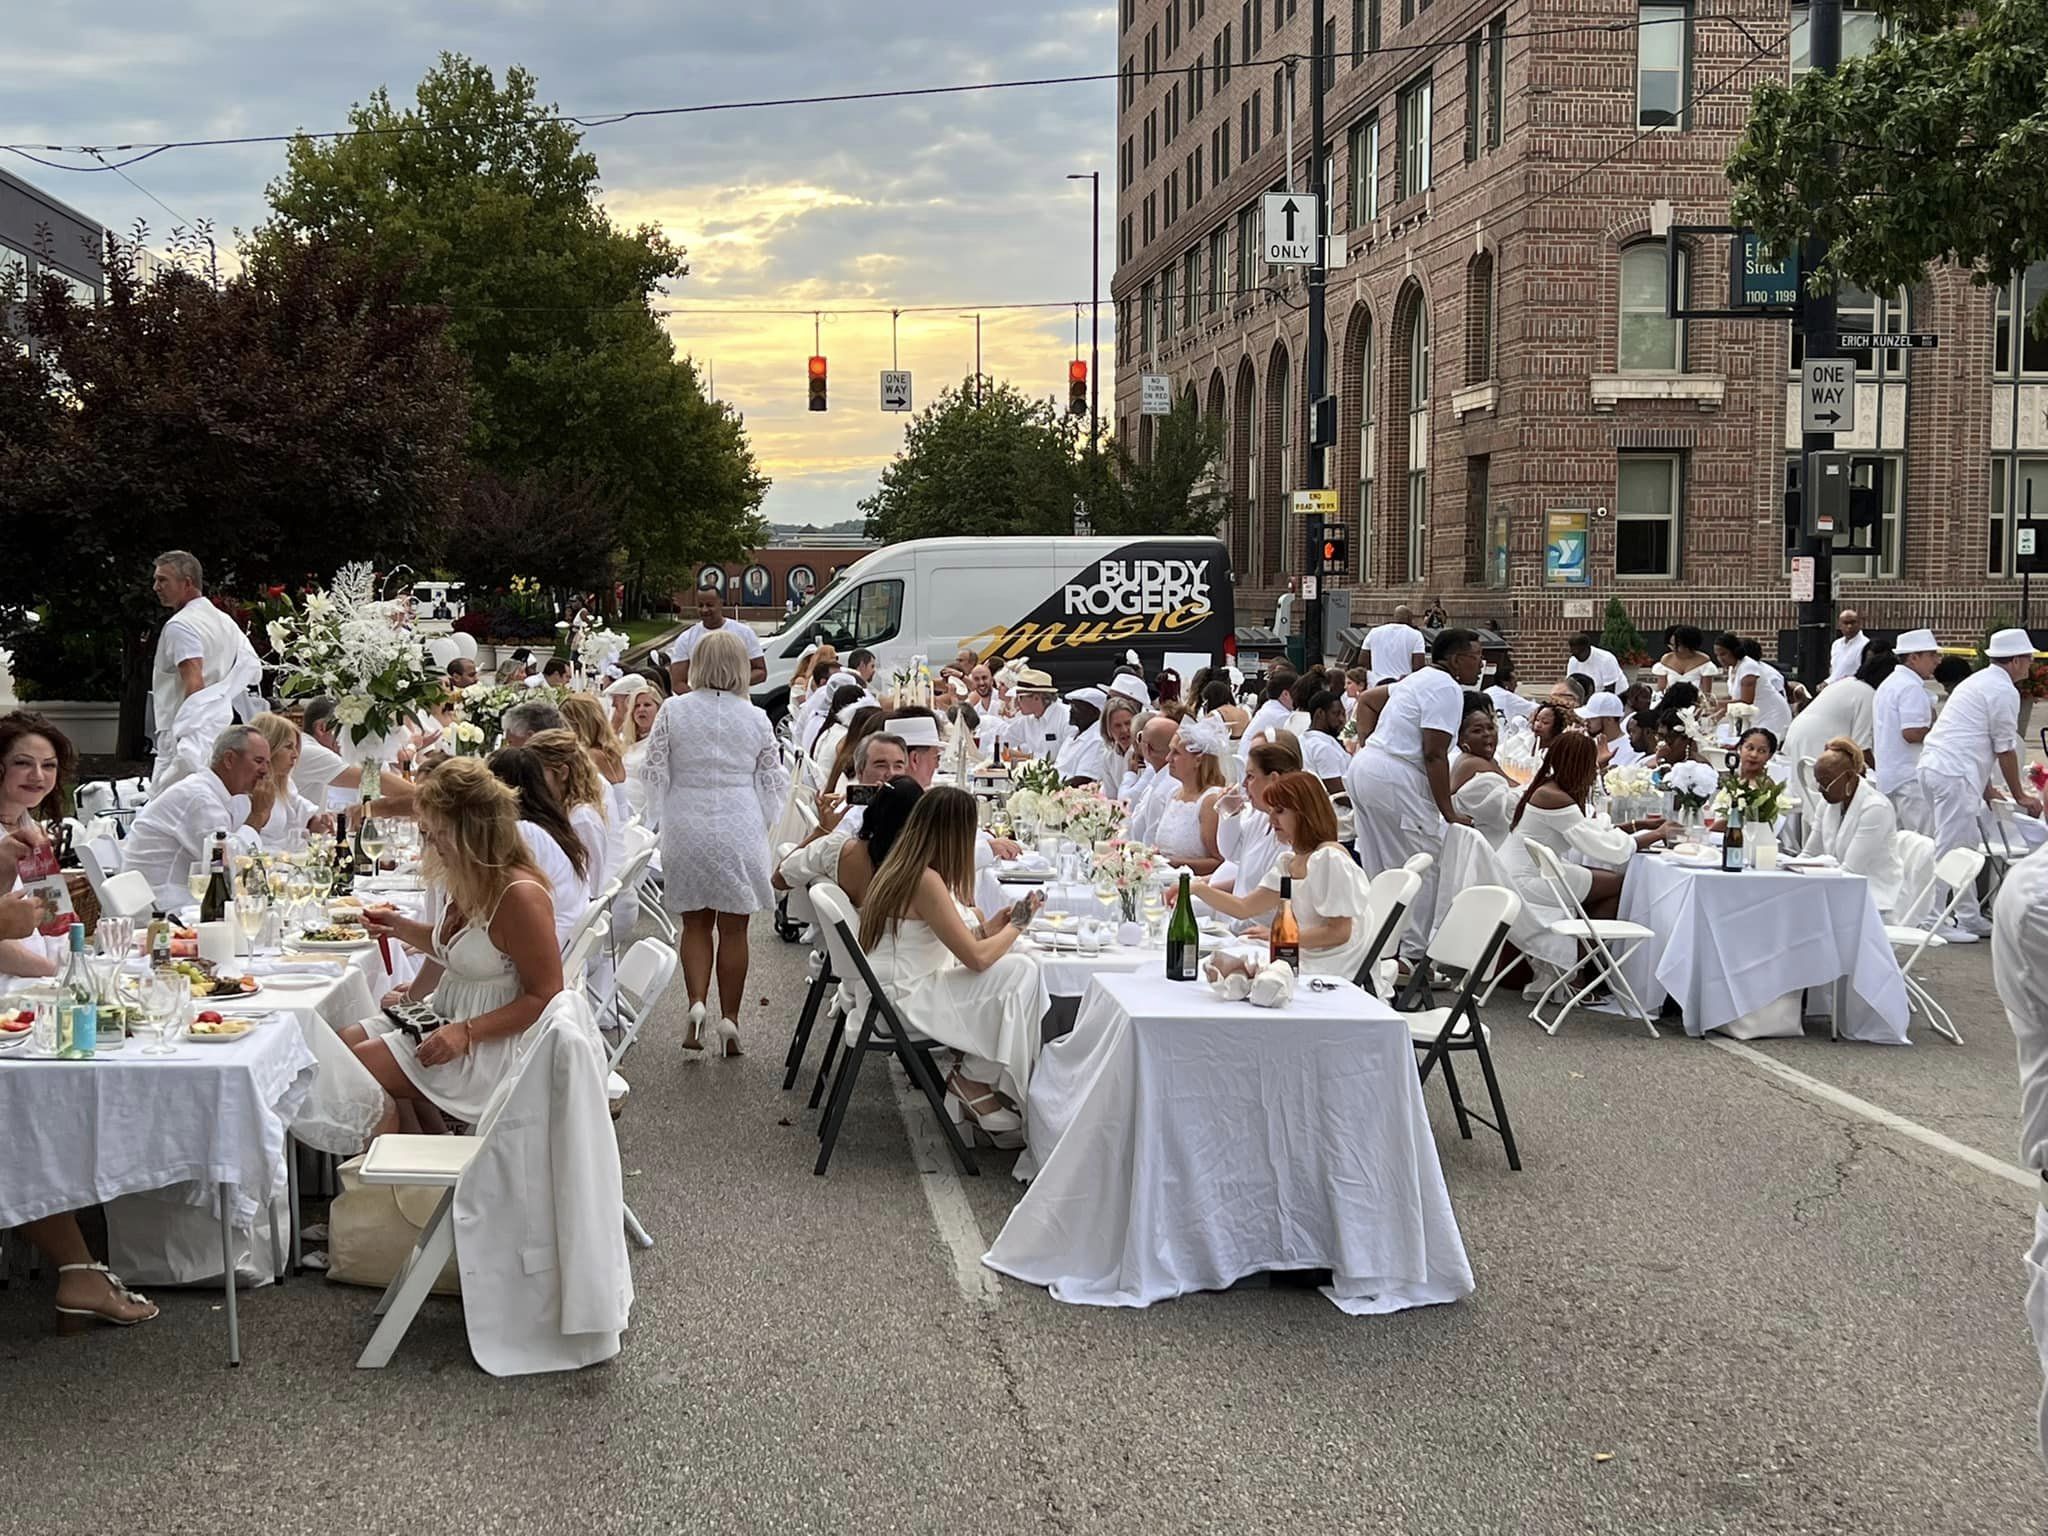 Thank you to our sponsor Buddy Rogers Music for making our Diner en Blanc dreams possible